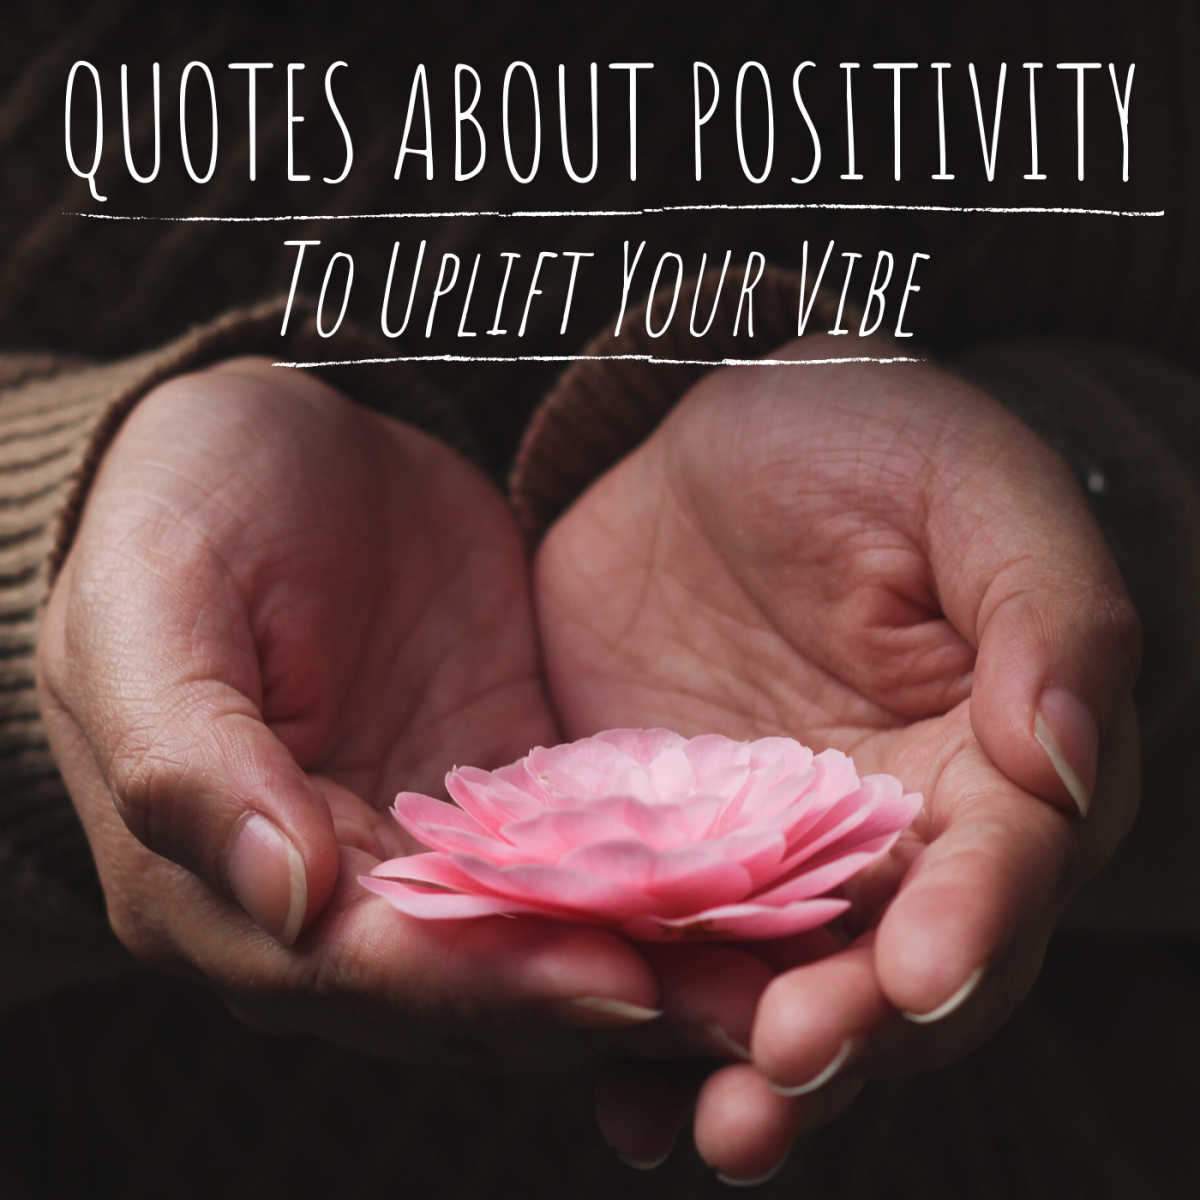 Quotations and Sayings About Good Vibes and Positivity - Holidappy